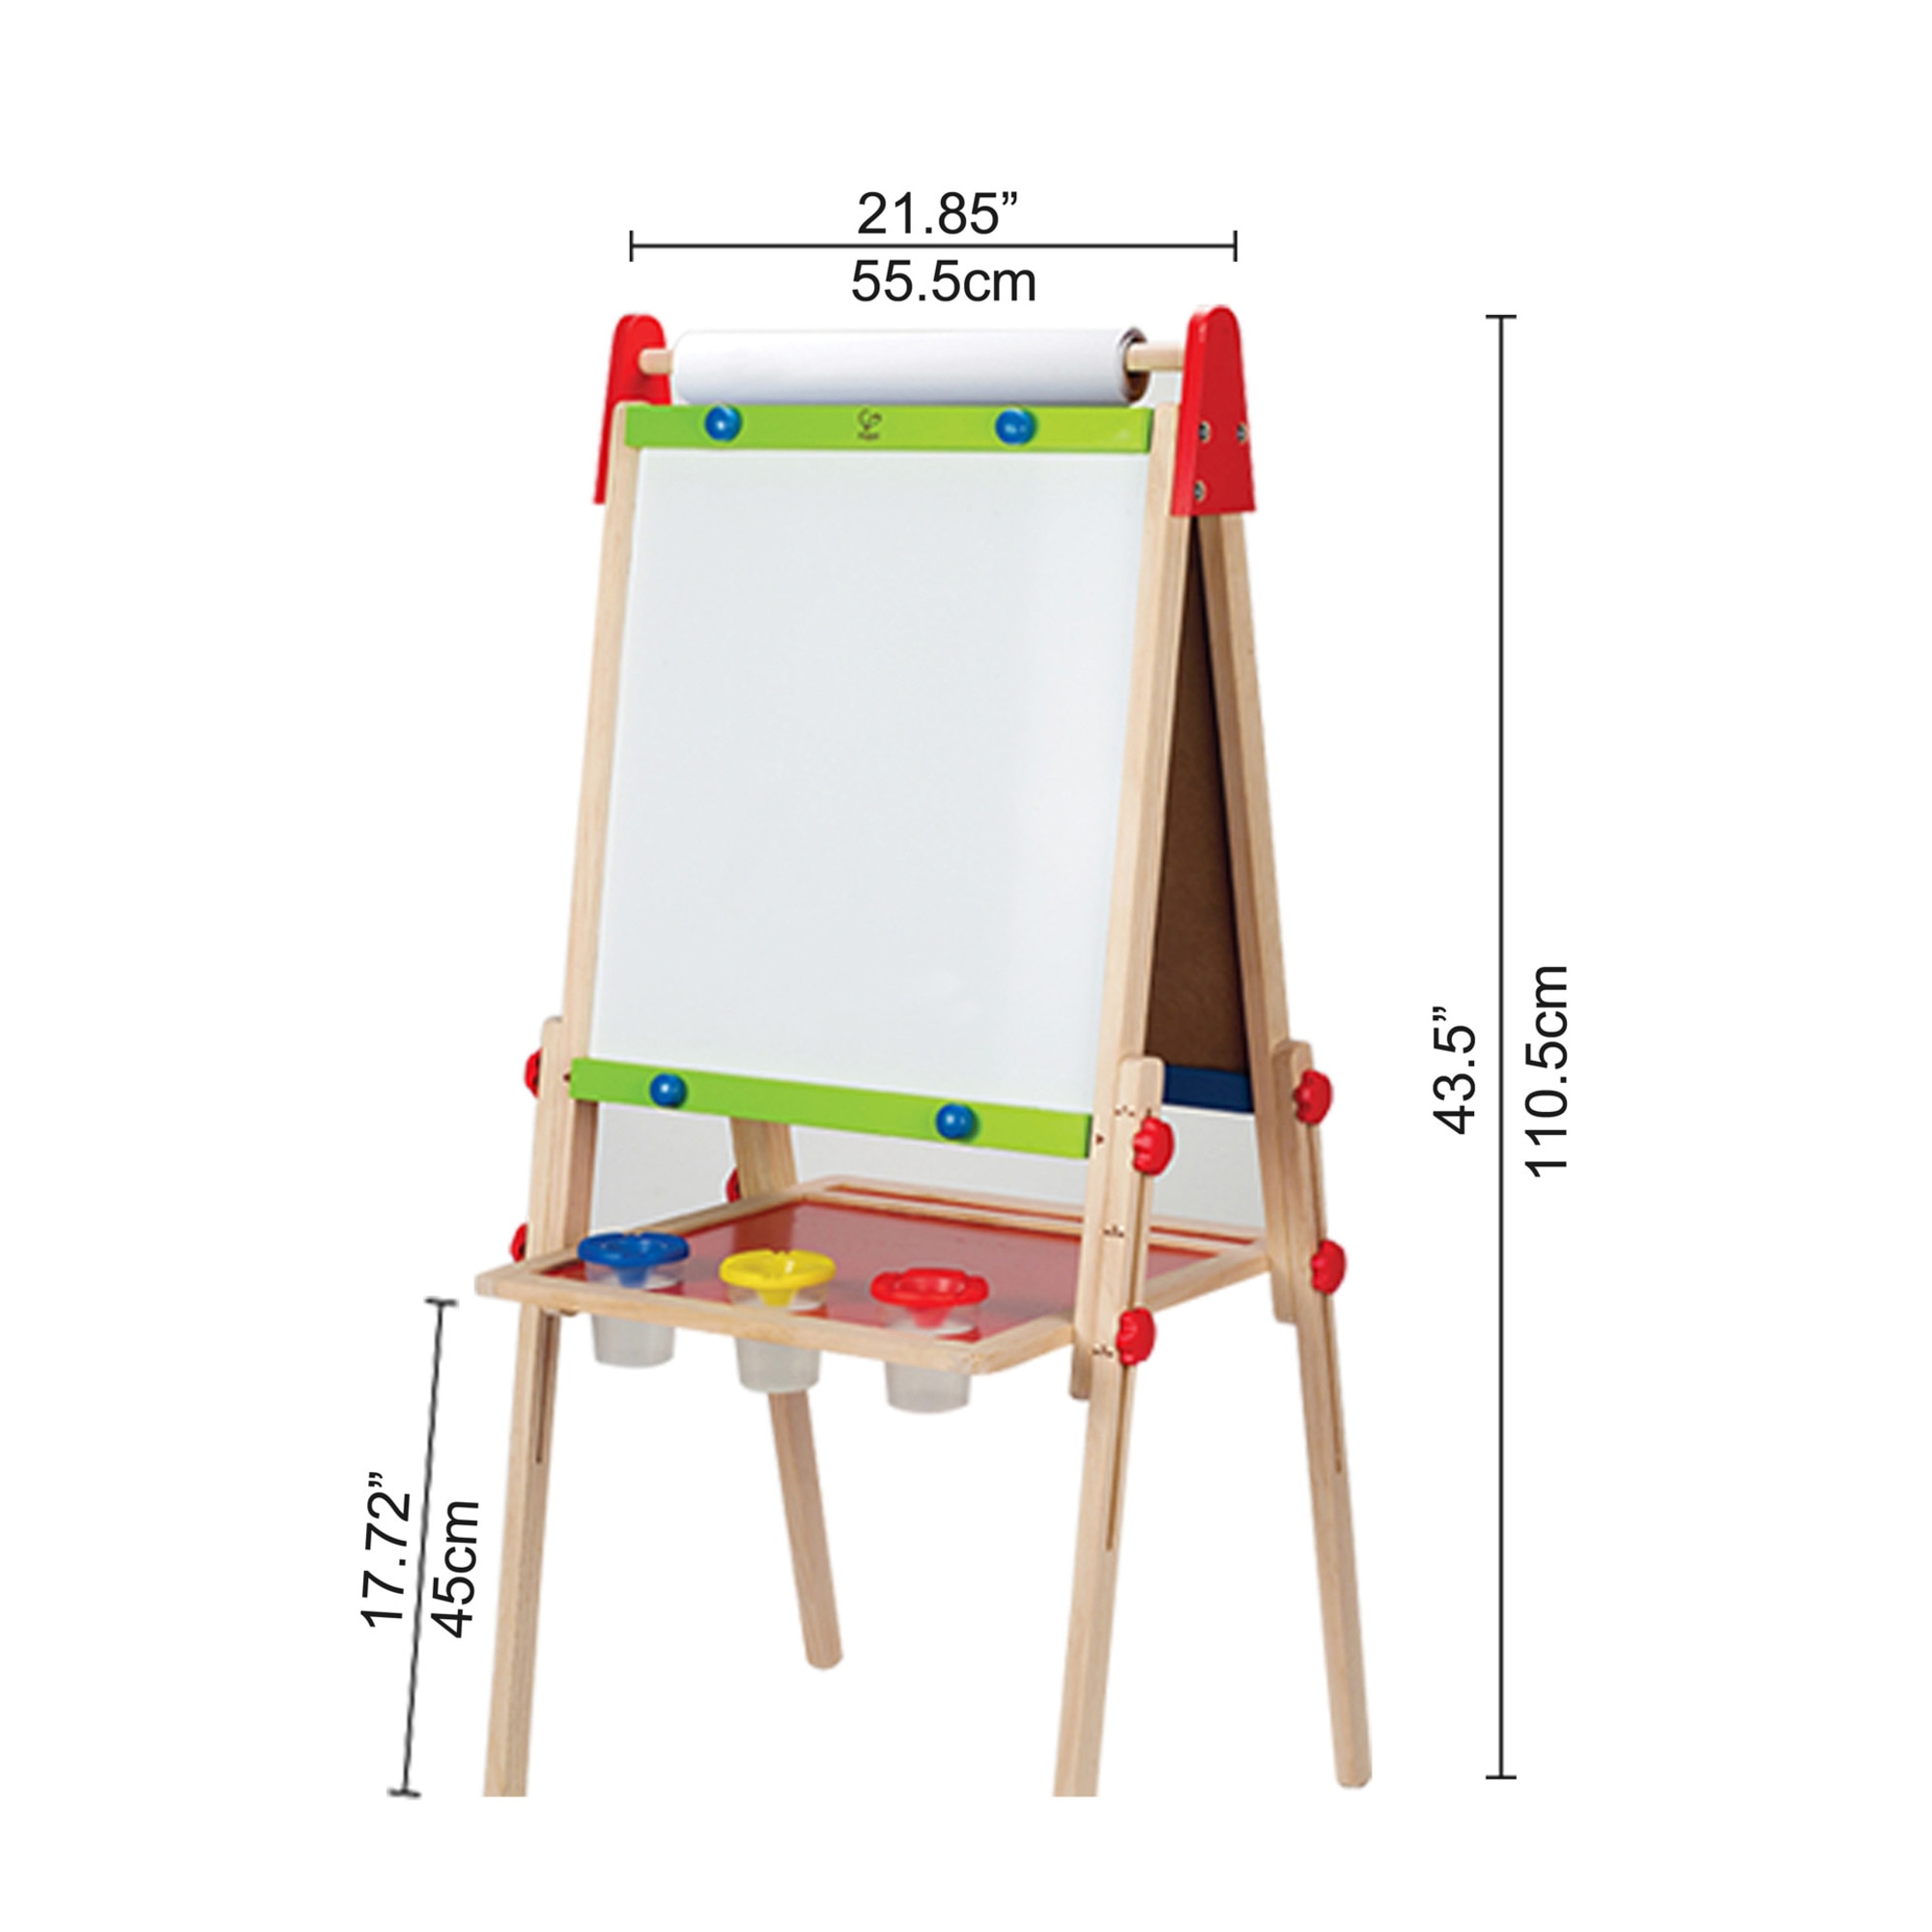 Hape All-in-One Double-Sided Art Easel w/ Paper Roll & Accessories, Blackboard & Magnetic Whiteboard - image 3 of 6